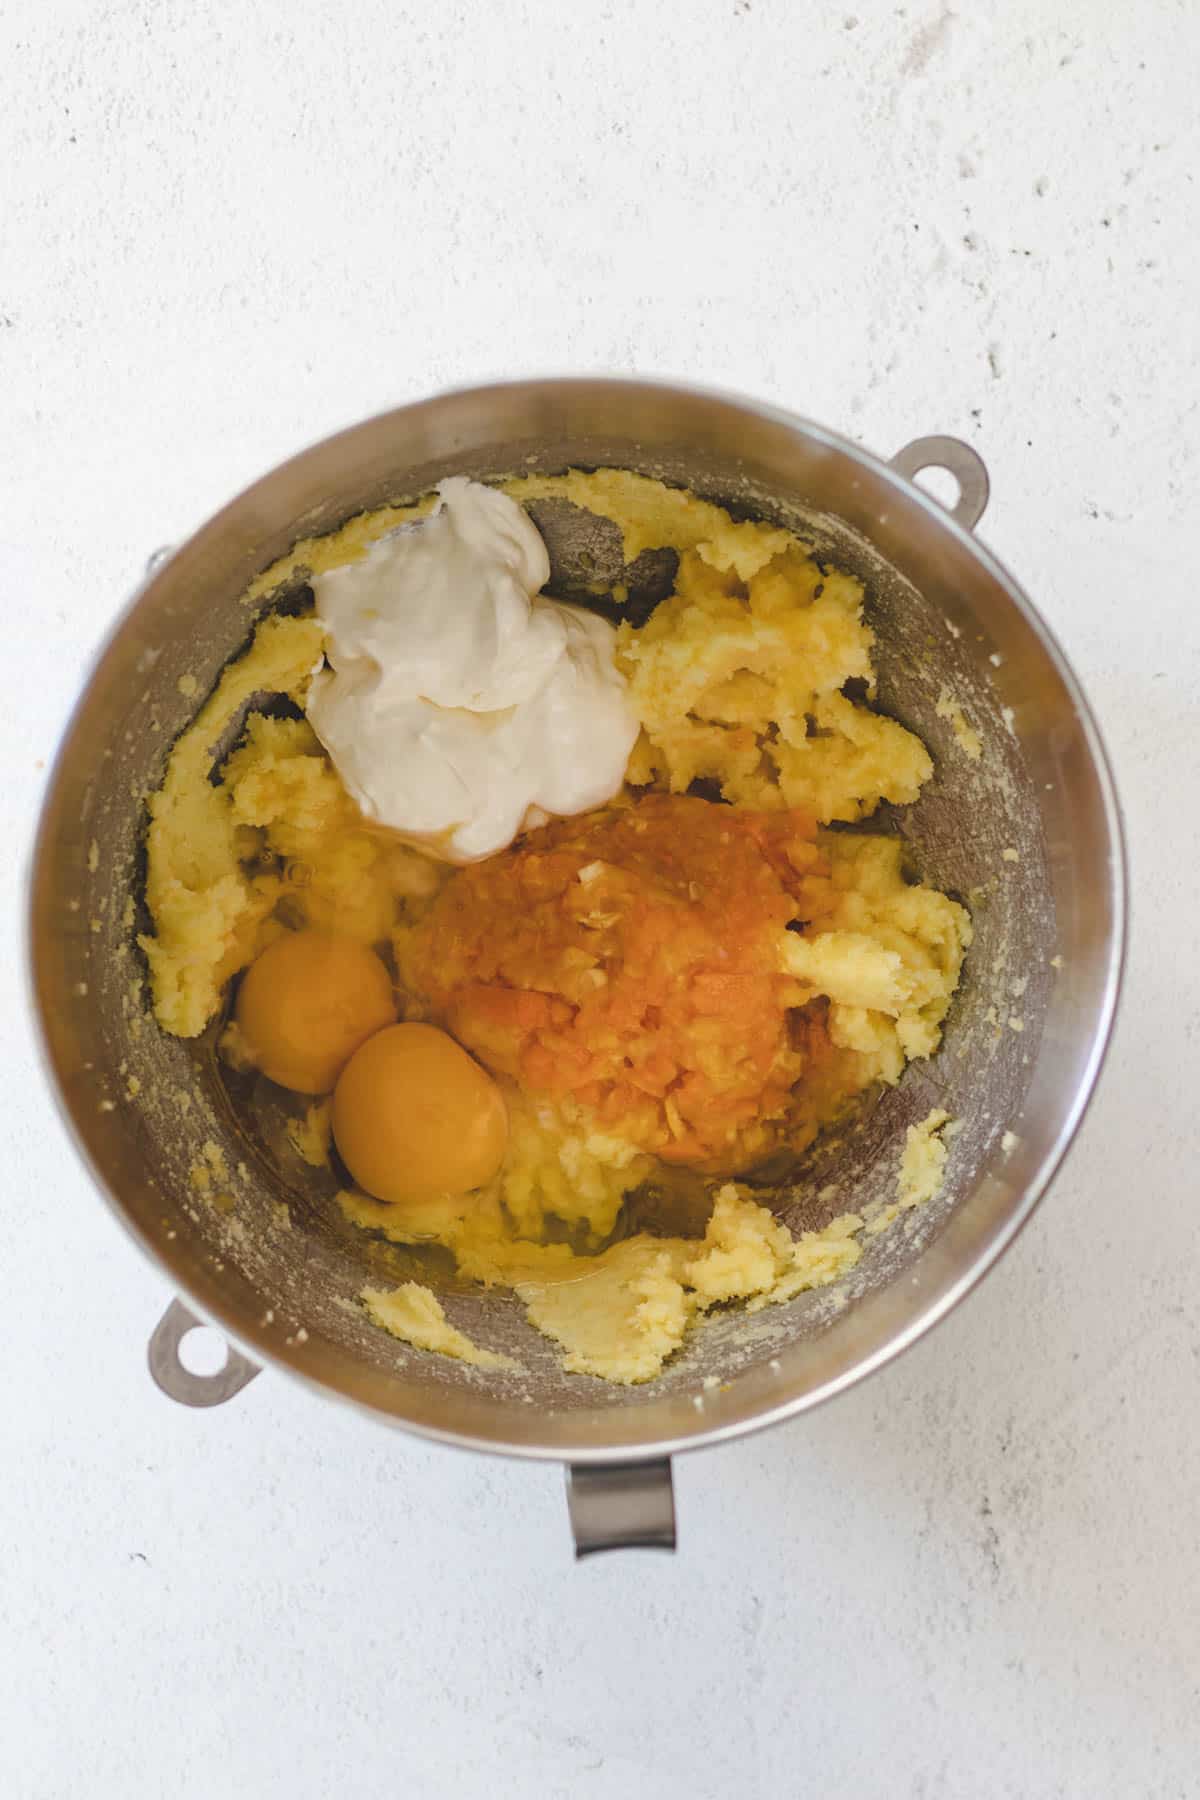 Beating kumquats, eggs, and sour cream into the batter.